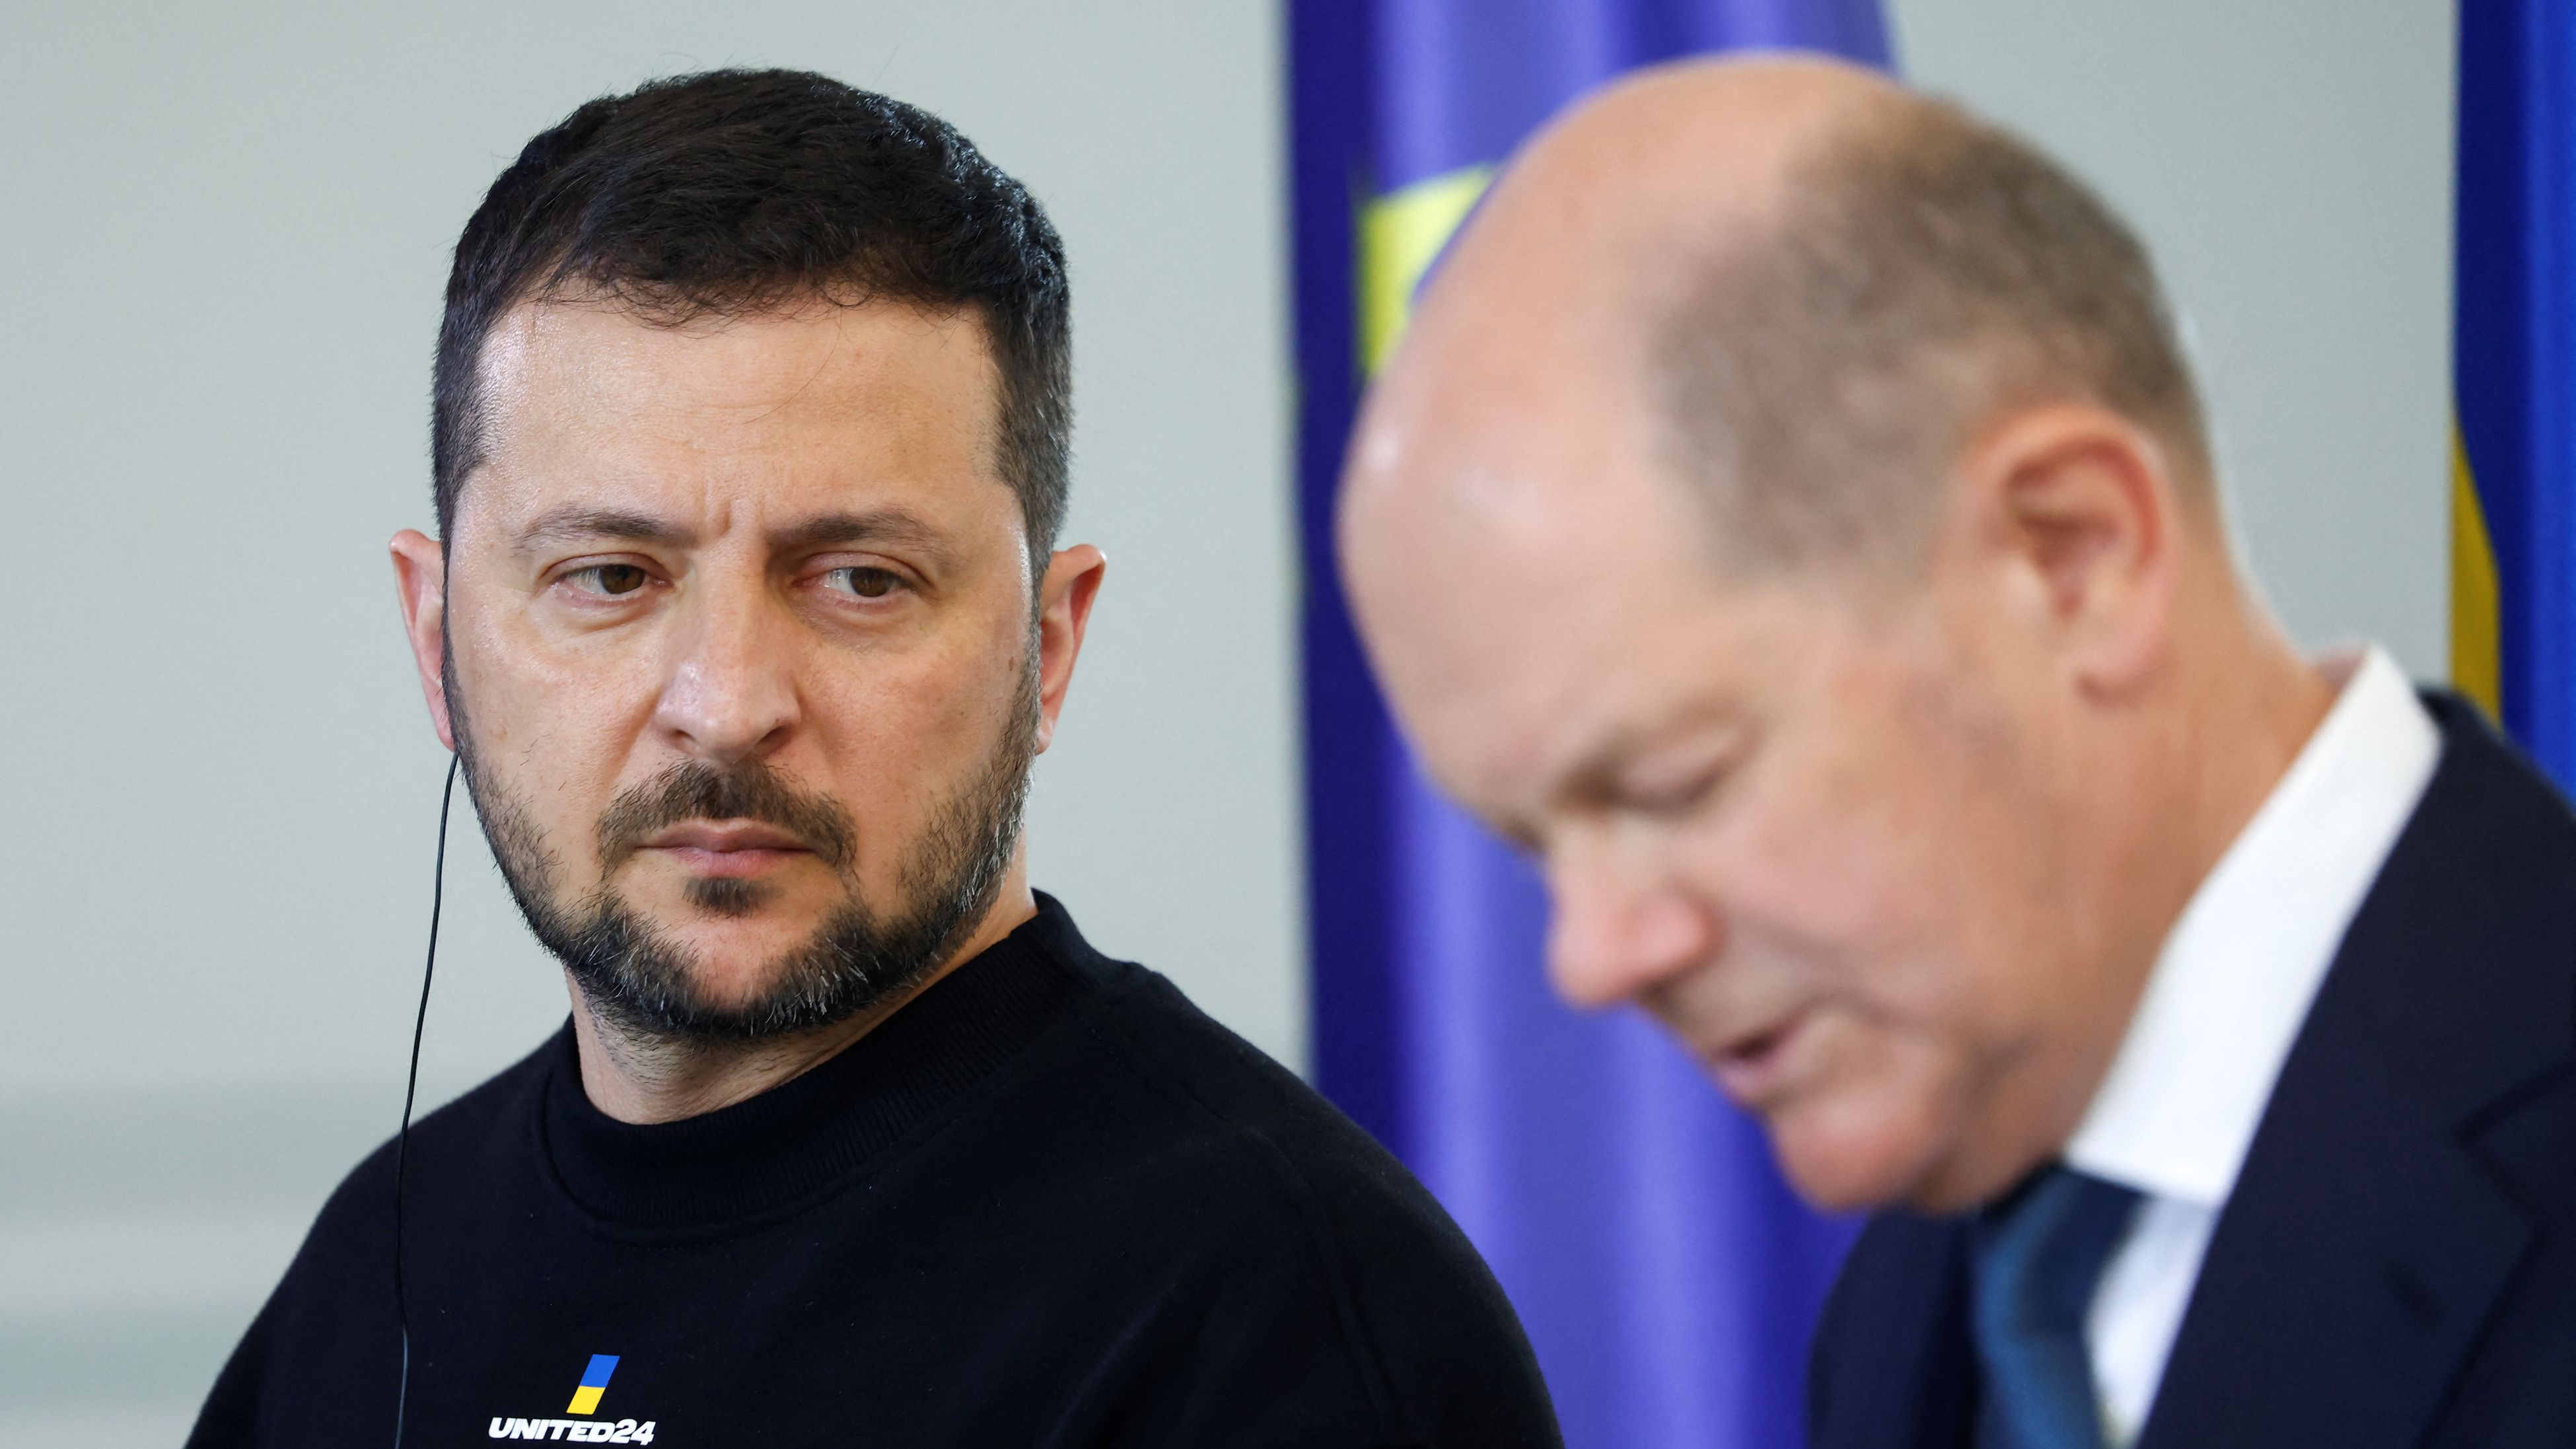 President Volodymyr Zelenskyy was in Berlin to meet German Chancellor Olaf Scholz at the weekend. /Michele Tantussi/Reuters